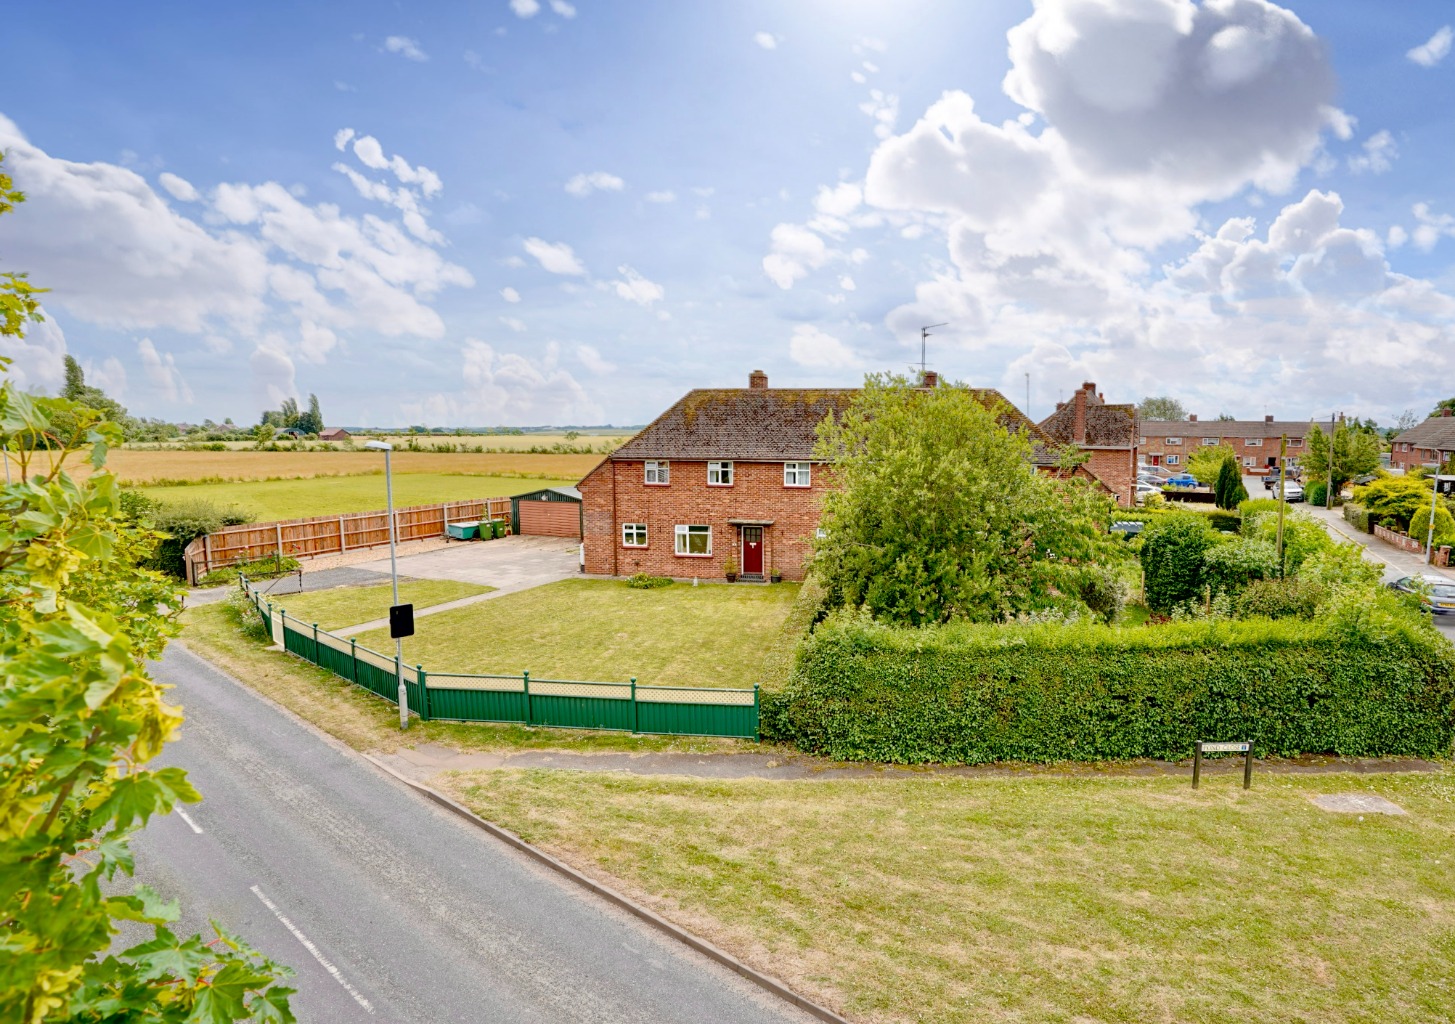 3 bed plot for sale in Pond Close, Huntingdon - Property Image 1